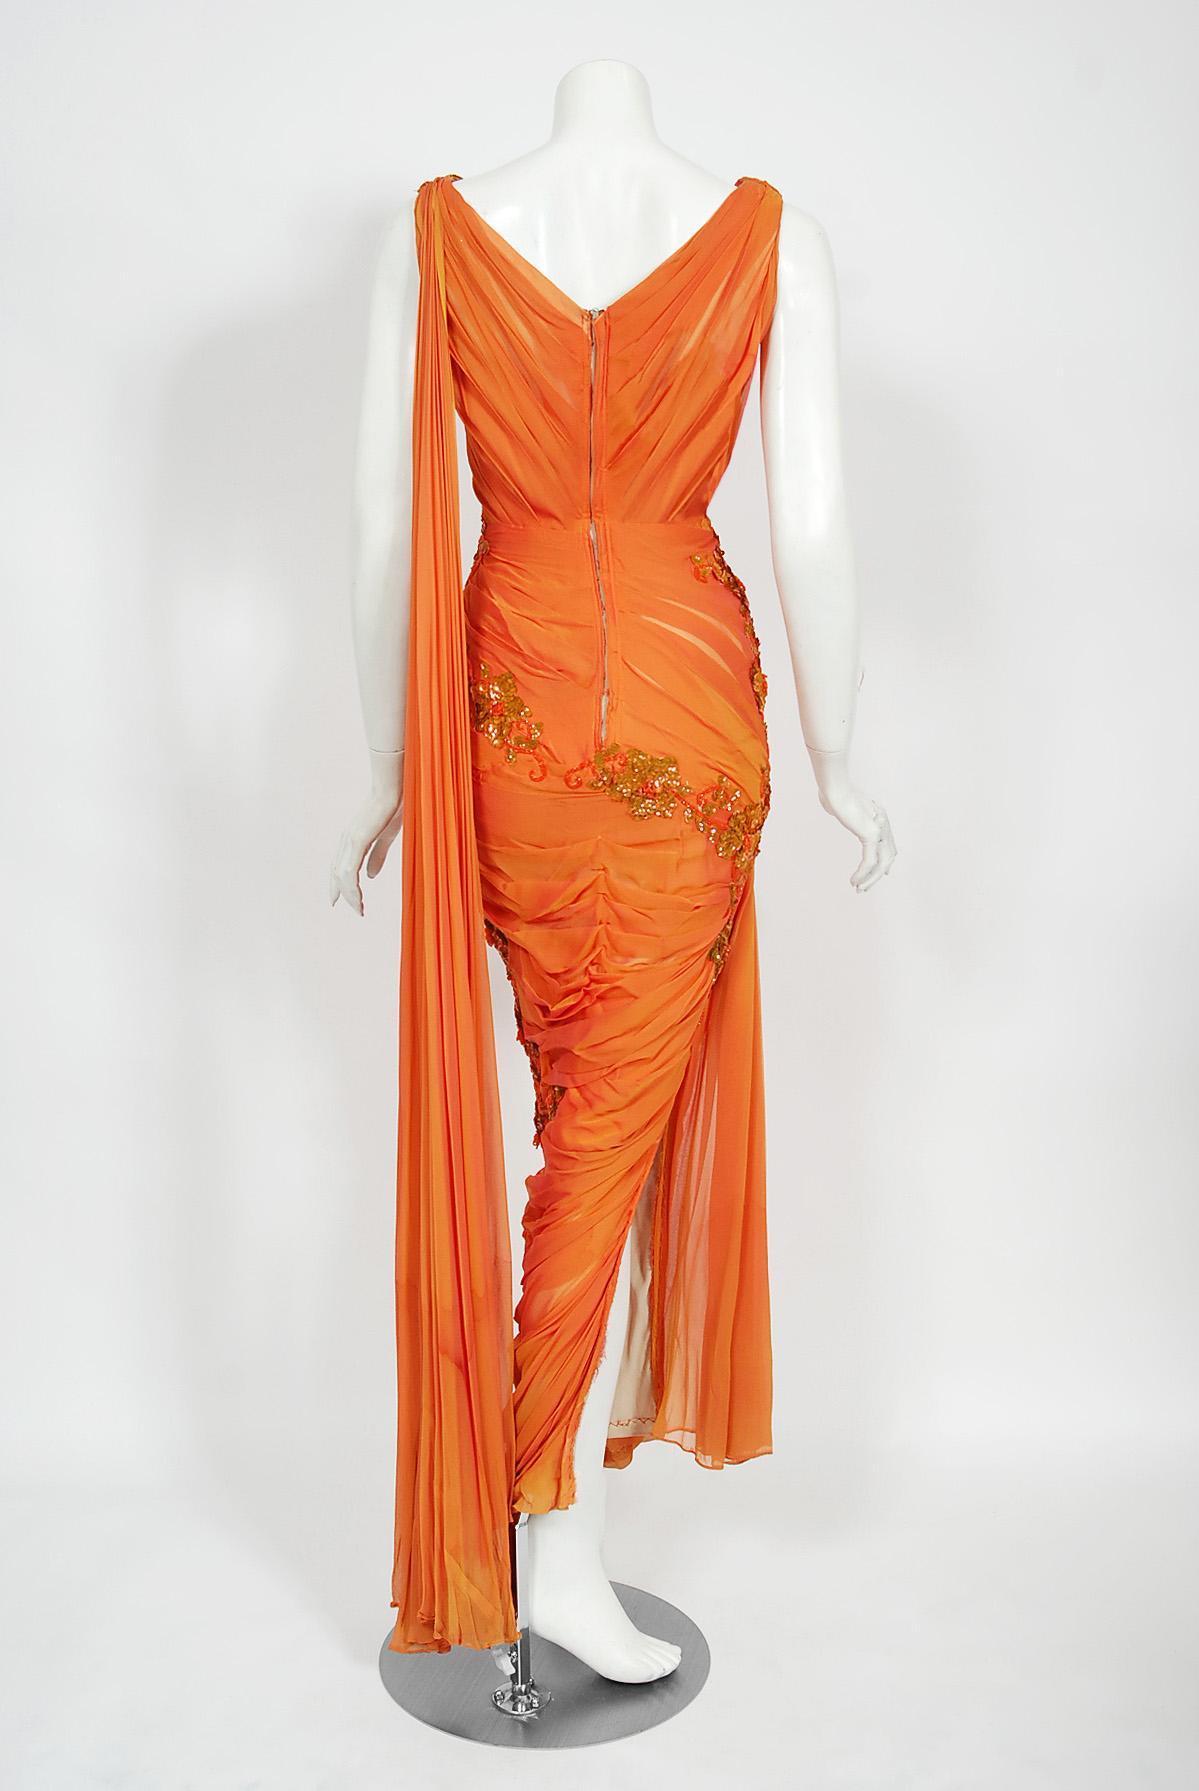 Vintage 1950s Orange Beaded Appliqué Ruched Chiffon Hourglass Old Hollywood Gown 7